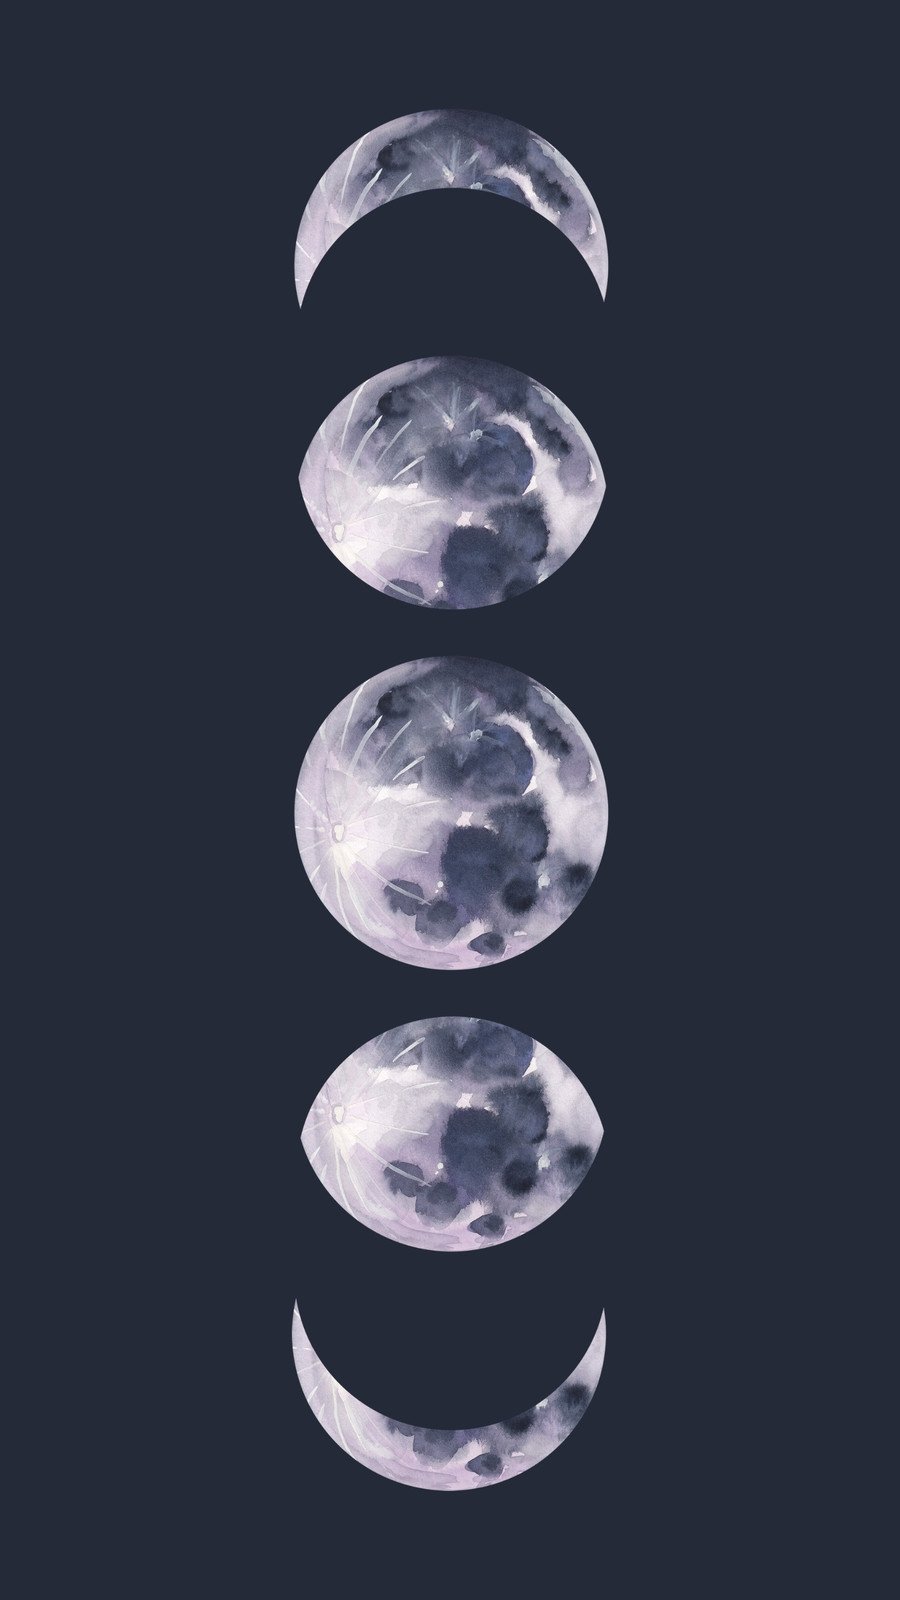 Free and customizable aesthetic moon wallpaper templates